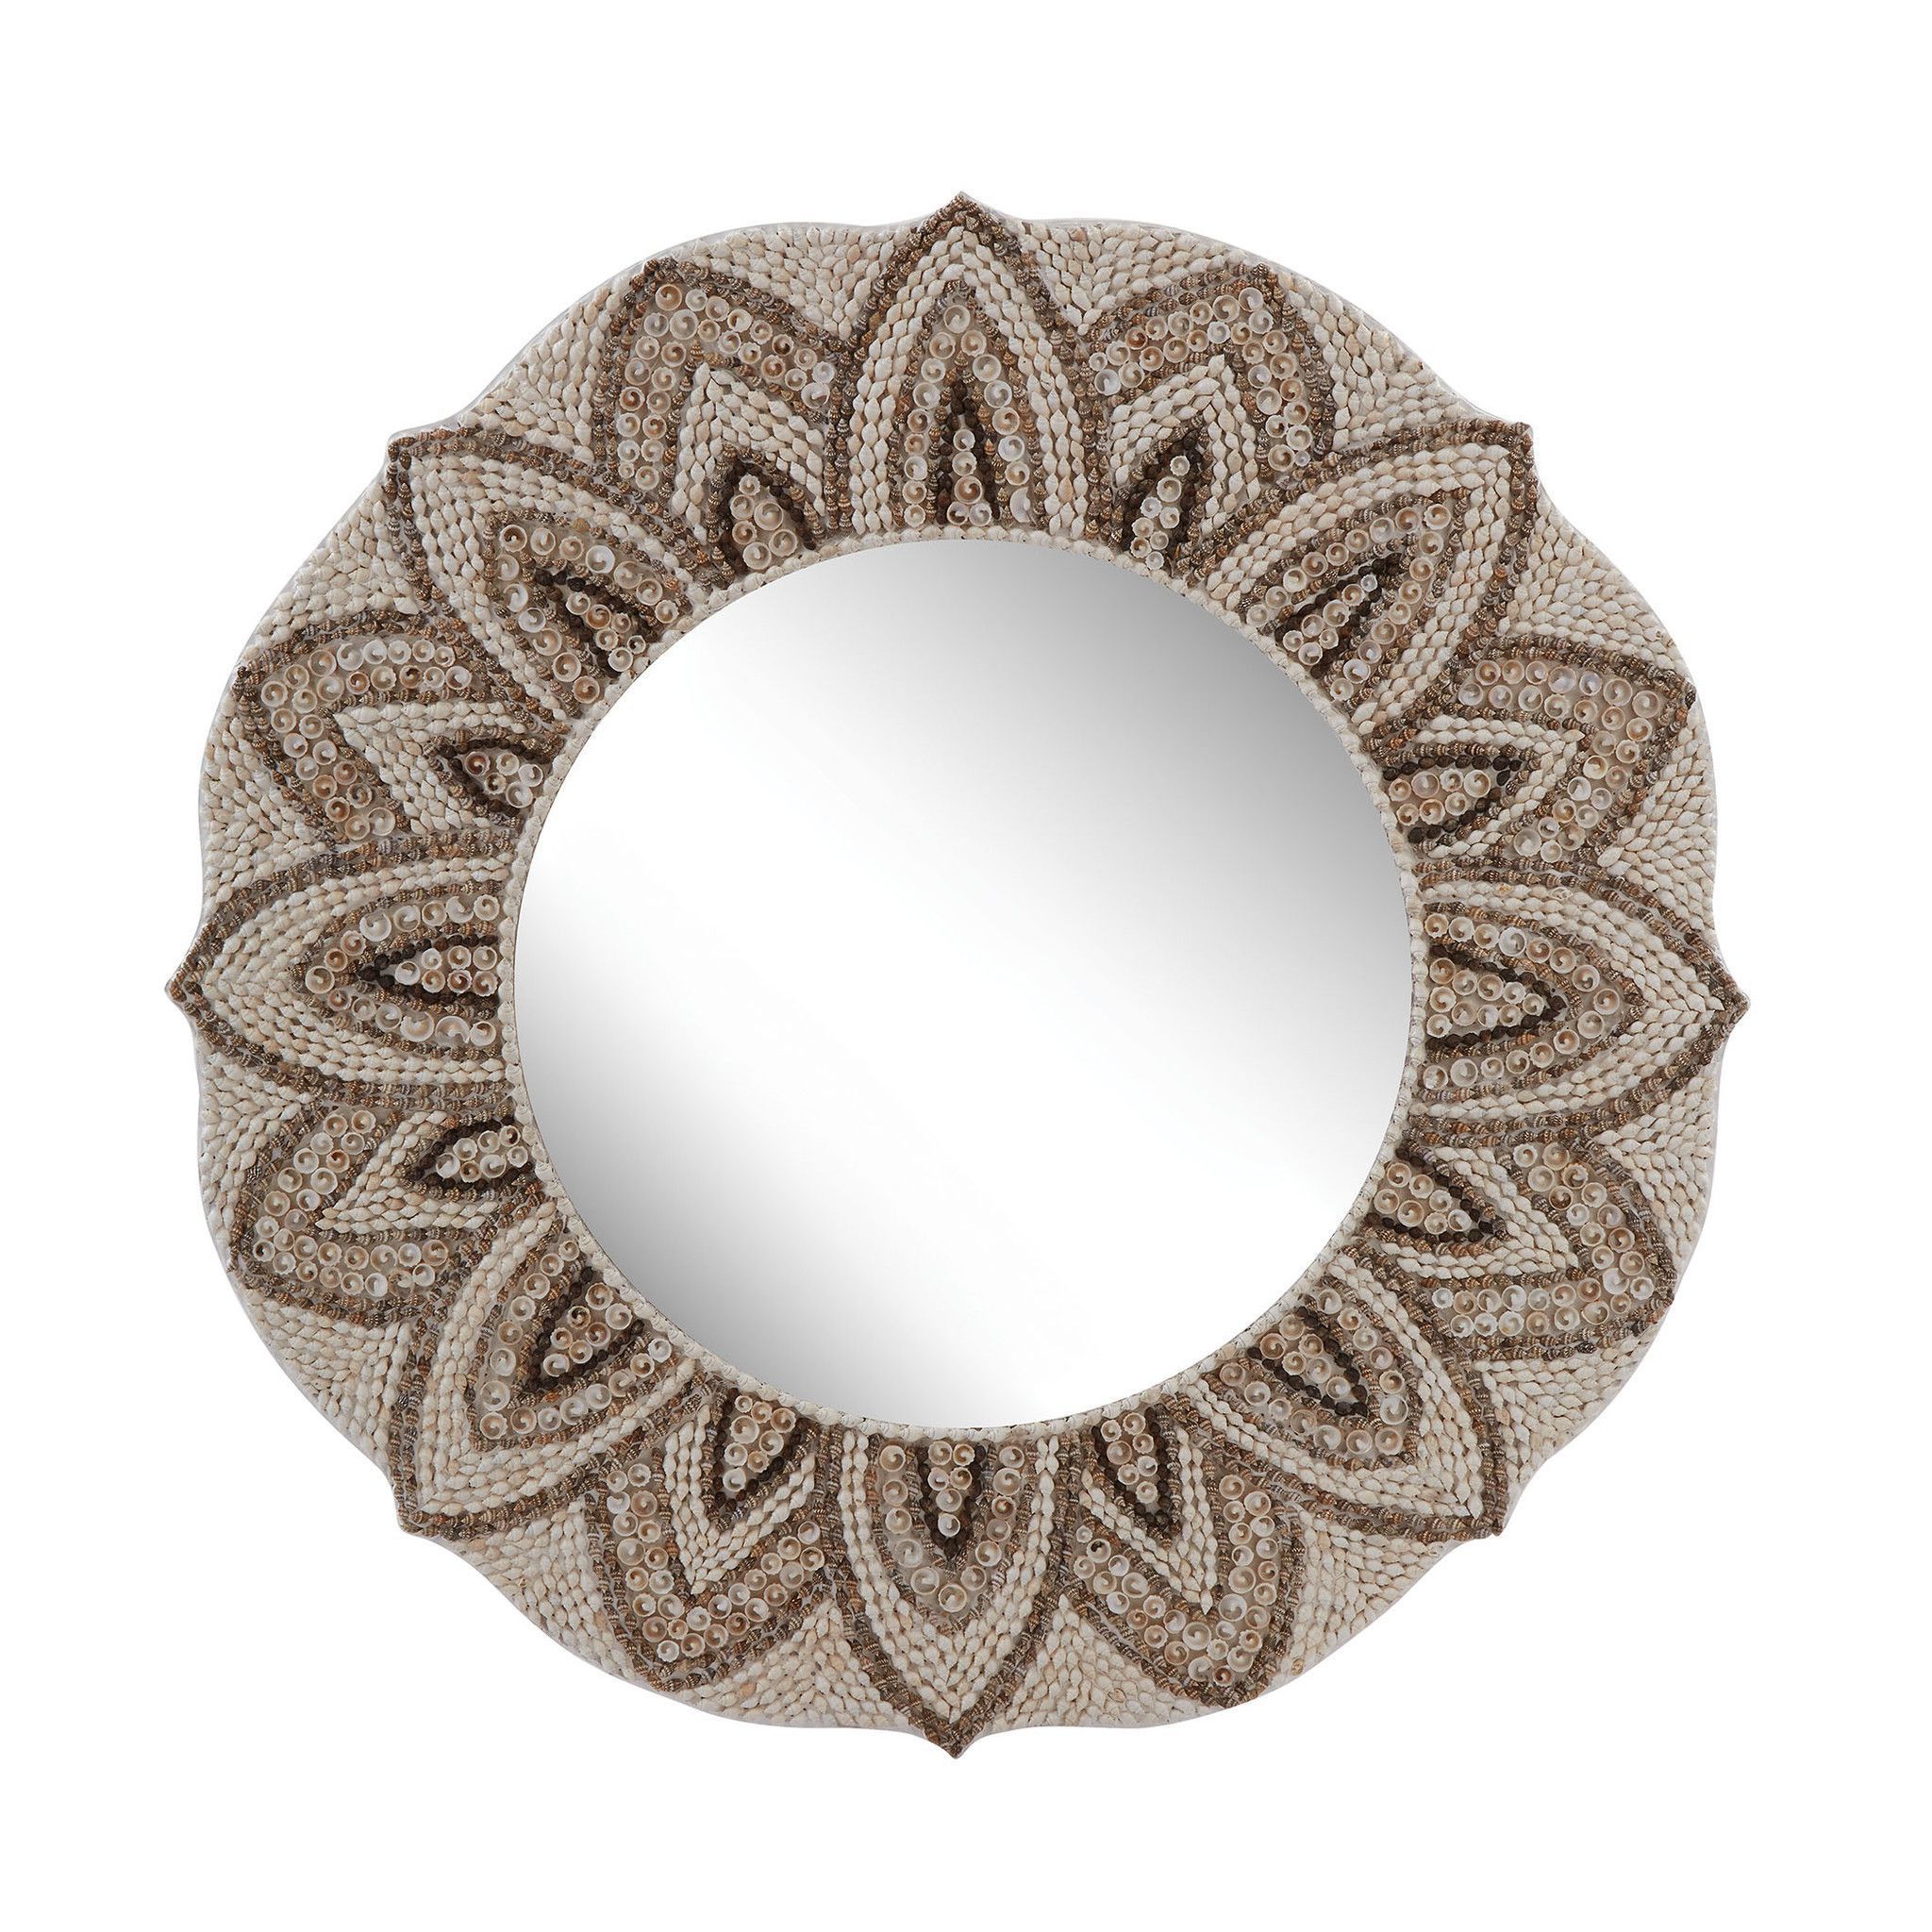 Shell Mirror, Shell Mosaic With Current Shell Mosaic Wall Mirrors (View 12 of 15)